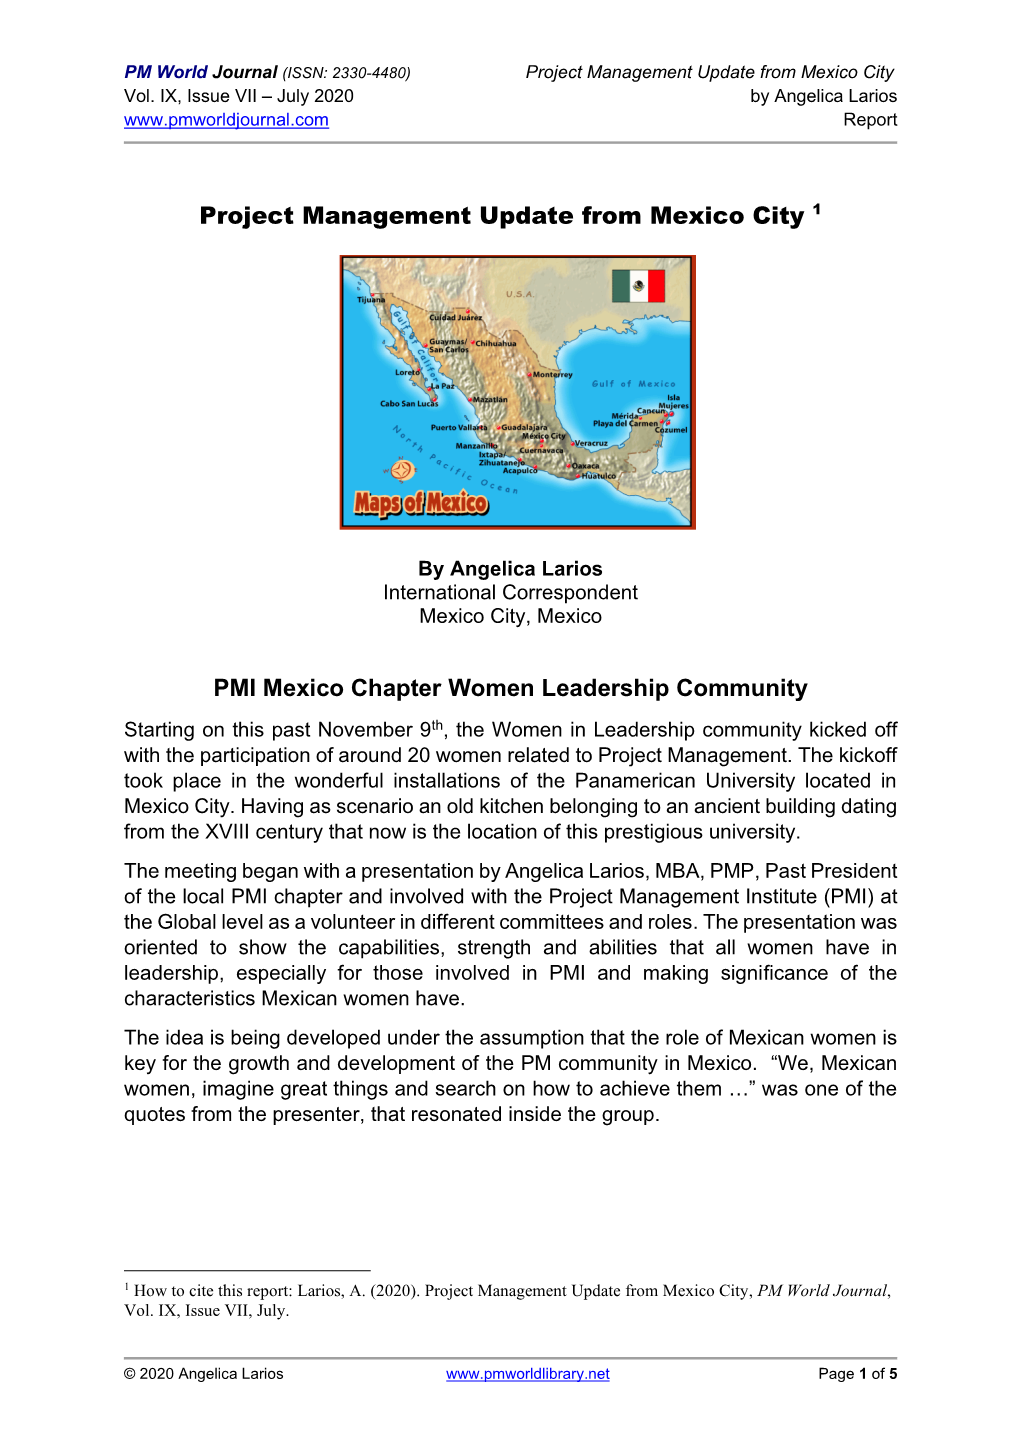 PMI Mexico Chapter Women Leadership Community (Project